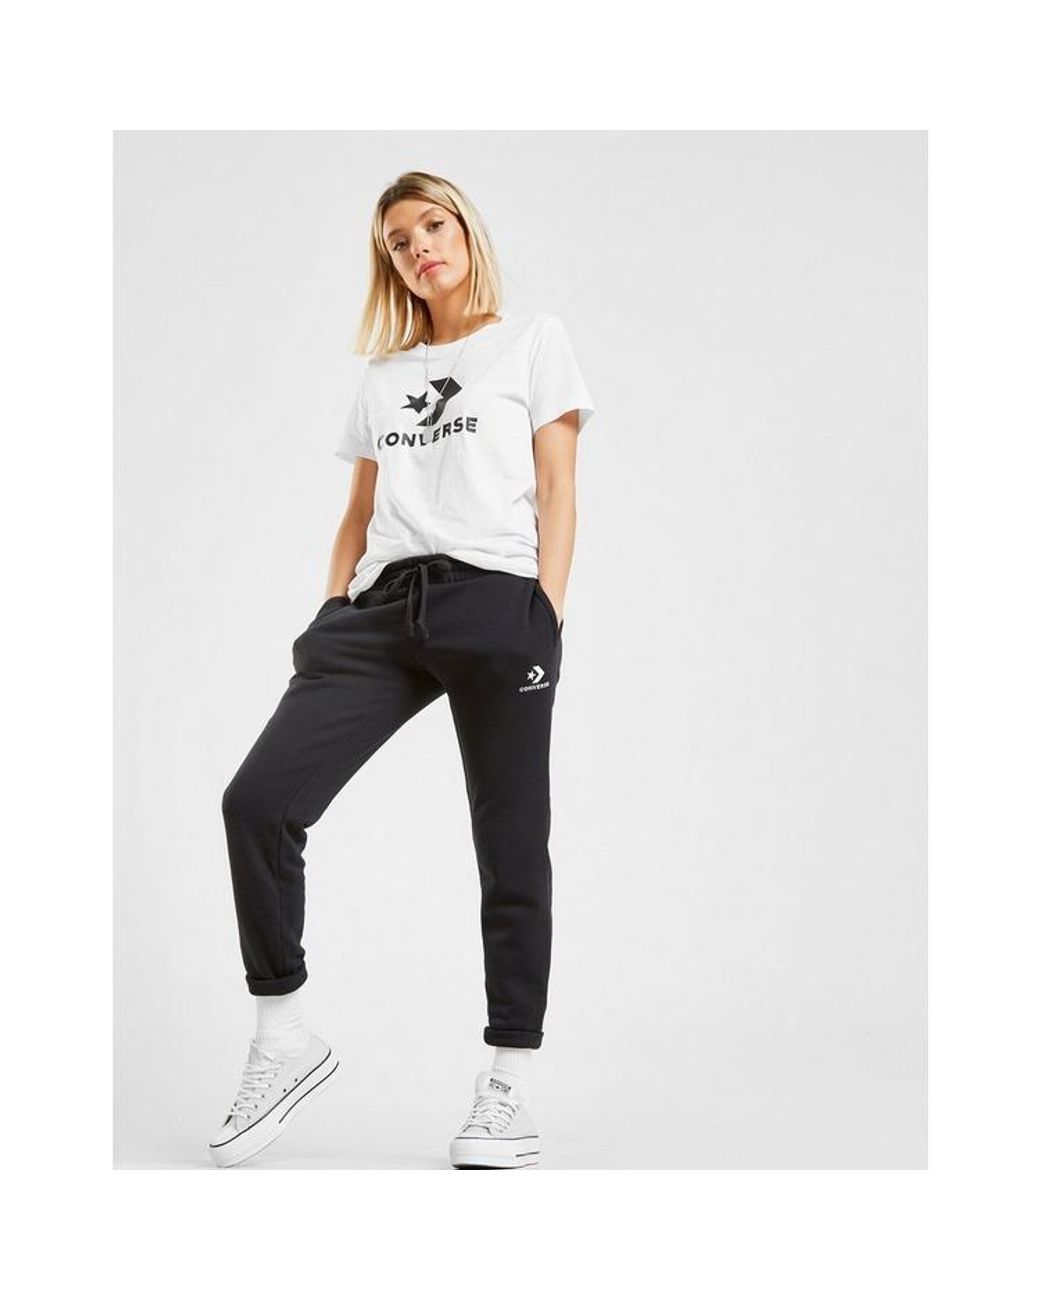 converse tracksuit womens